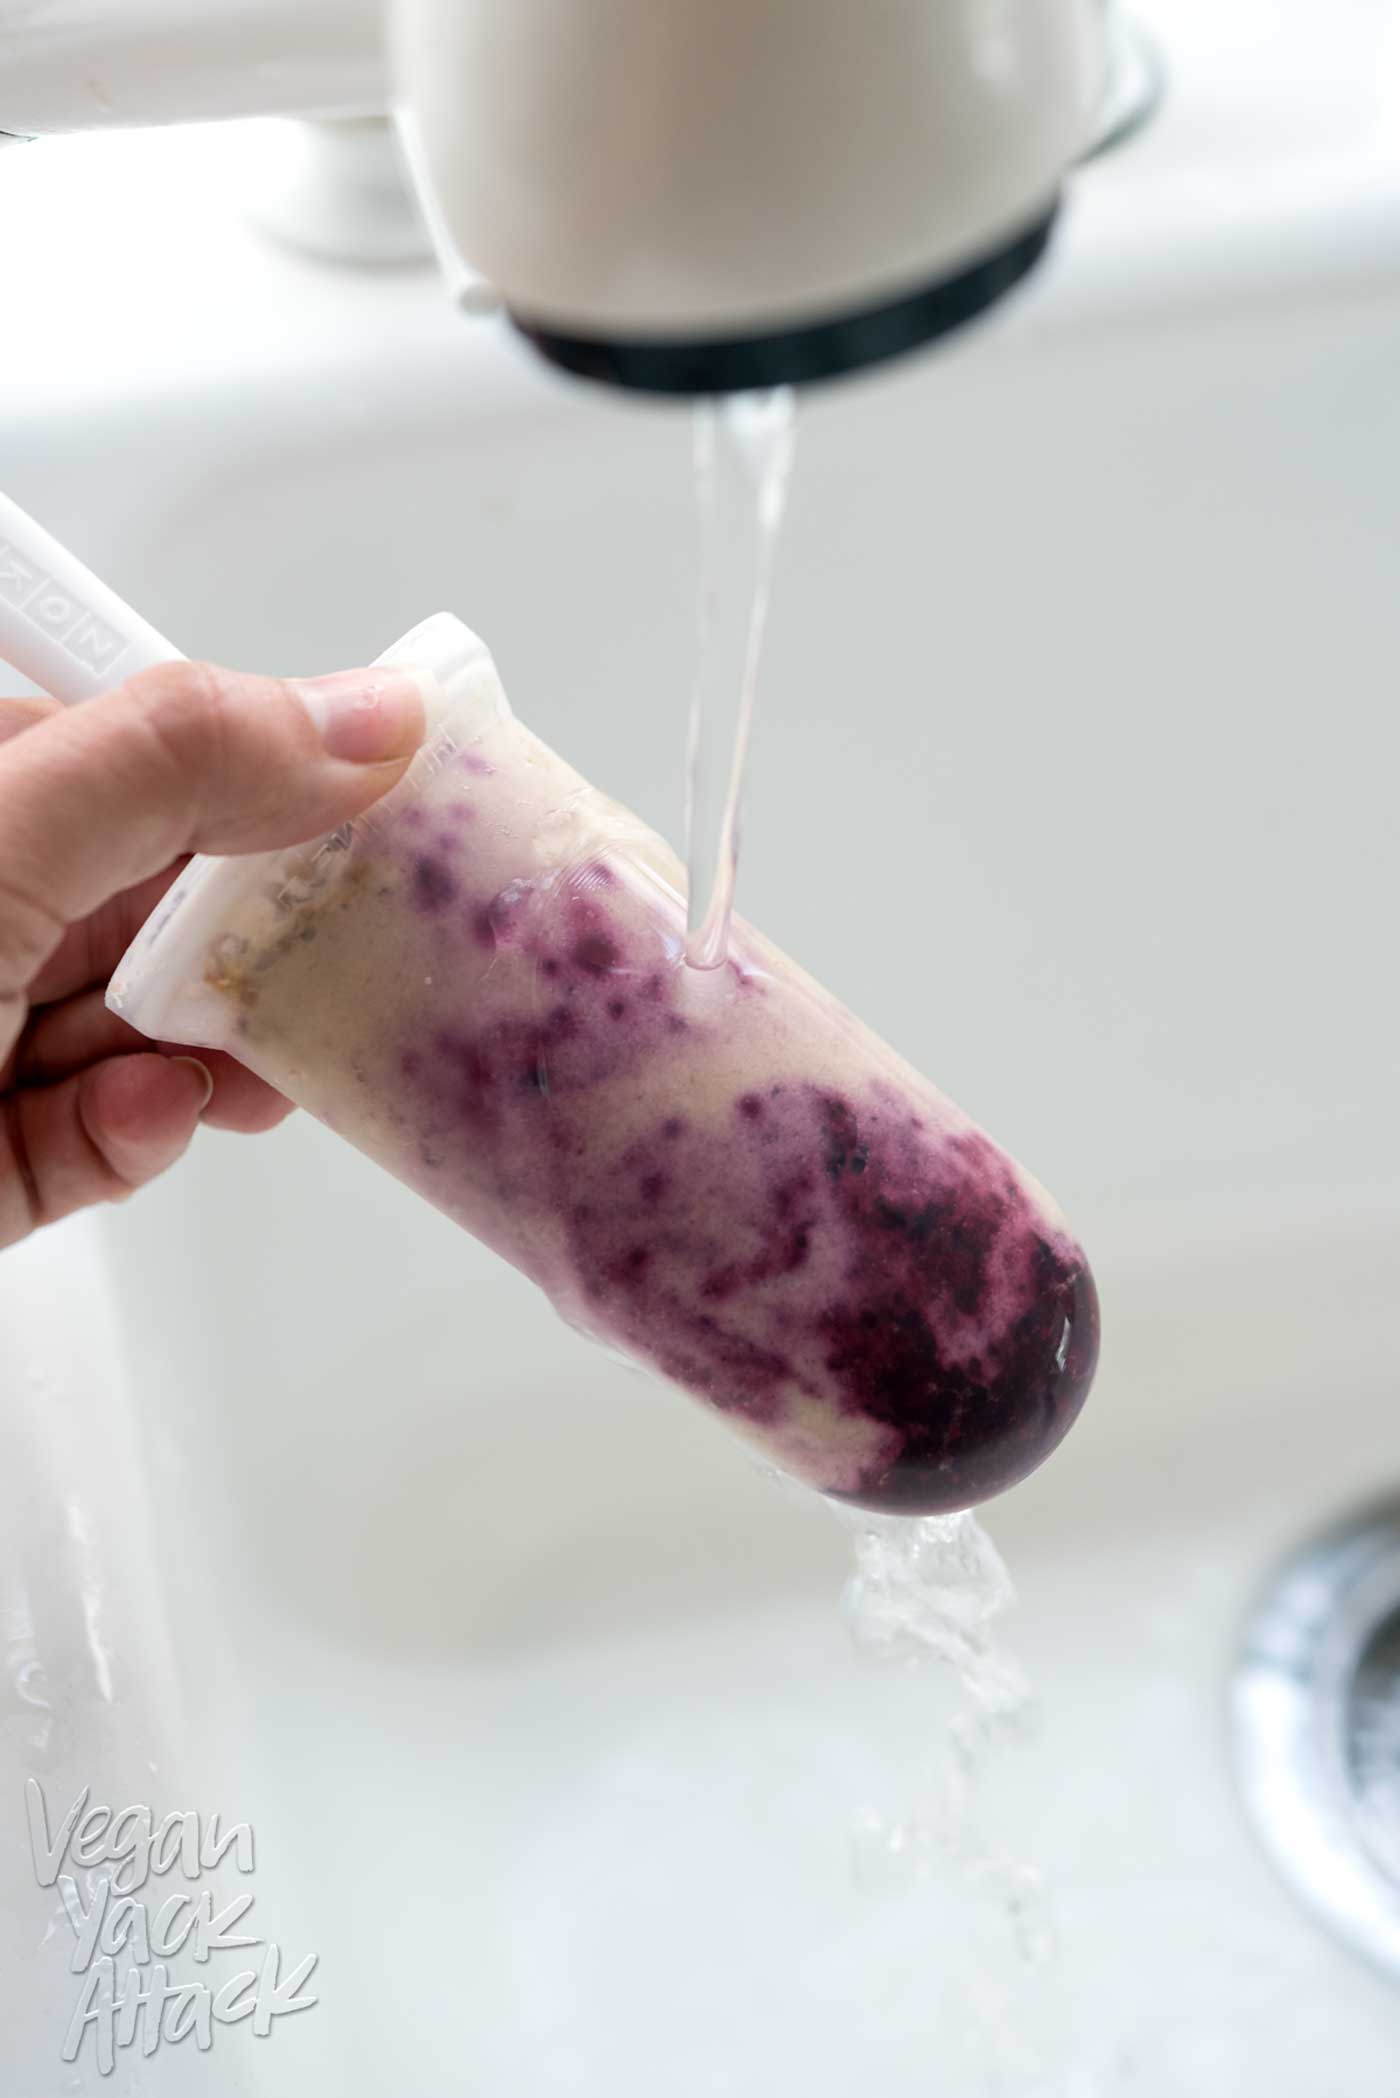 Allergy-friendly, low-fat, Blackberry Cheesecake Popsicles! Oh, and did I mention they’re vegan and SUPER delicious? #veganyackattack #glutenfree #soyfree #nutfree #oilfree